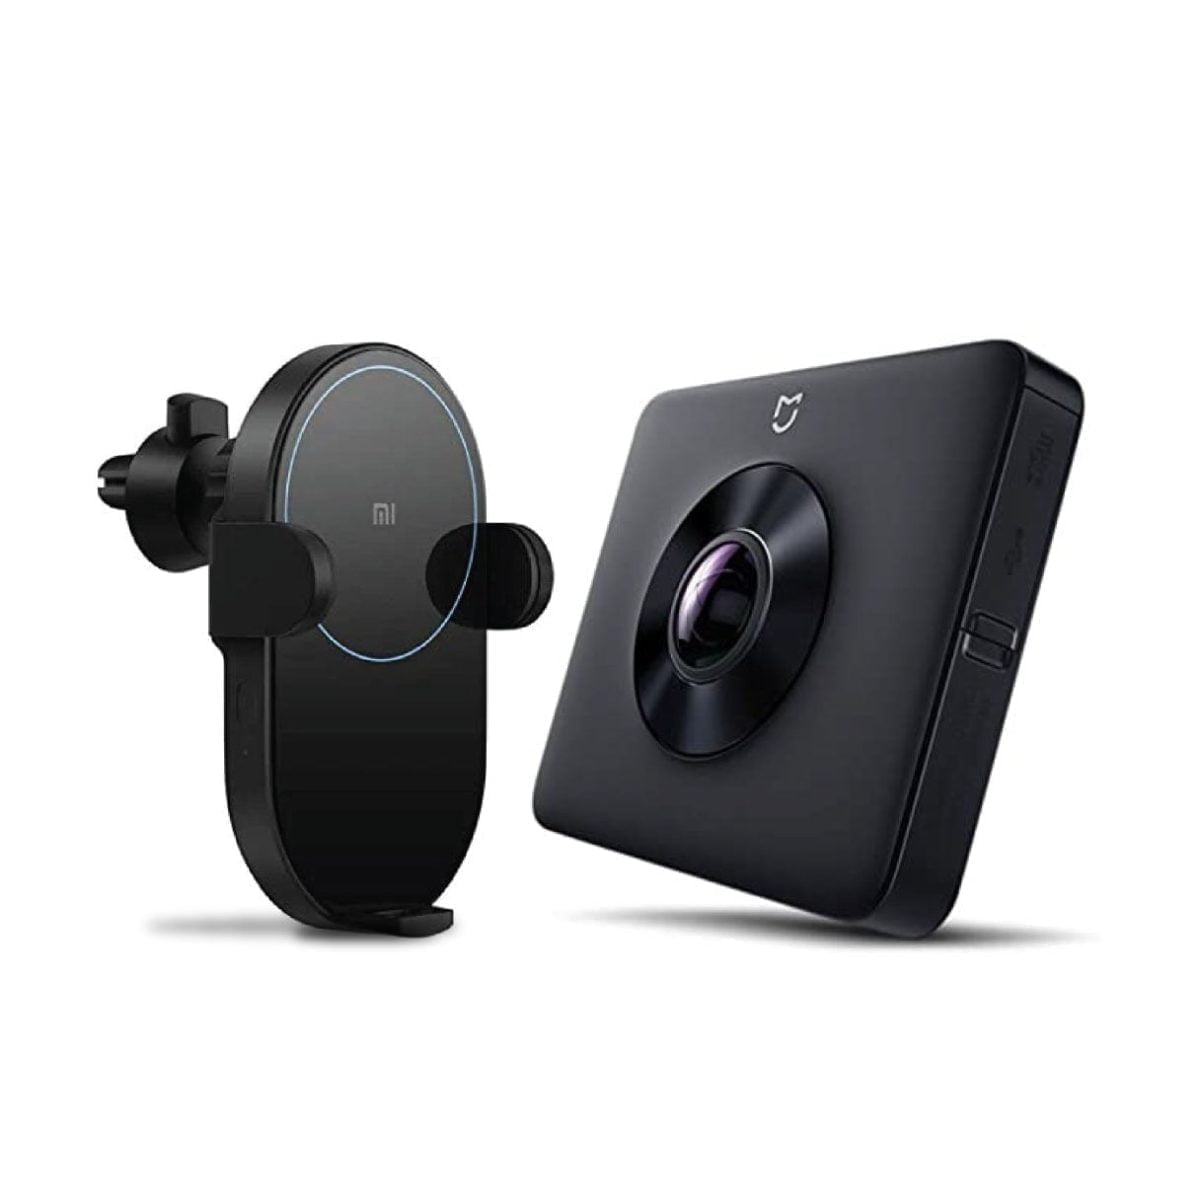 Wqa Https://Lablaab.com/Product/8873/ Https://Lablaab.com/Product/Xiaomi-Wireless-Car-Charger-20W-Max-Power-Inductive-Electric-Clamp-Arm-Double-Heat-Dissipation-Fast-Charging-Black/ Xiaomi Mi Sphere Camera Kit &Amp;Amp; Xiaomi Mi 20W Wireless Car Charger – Black